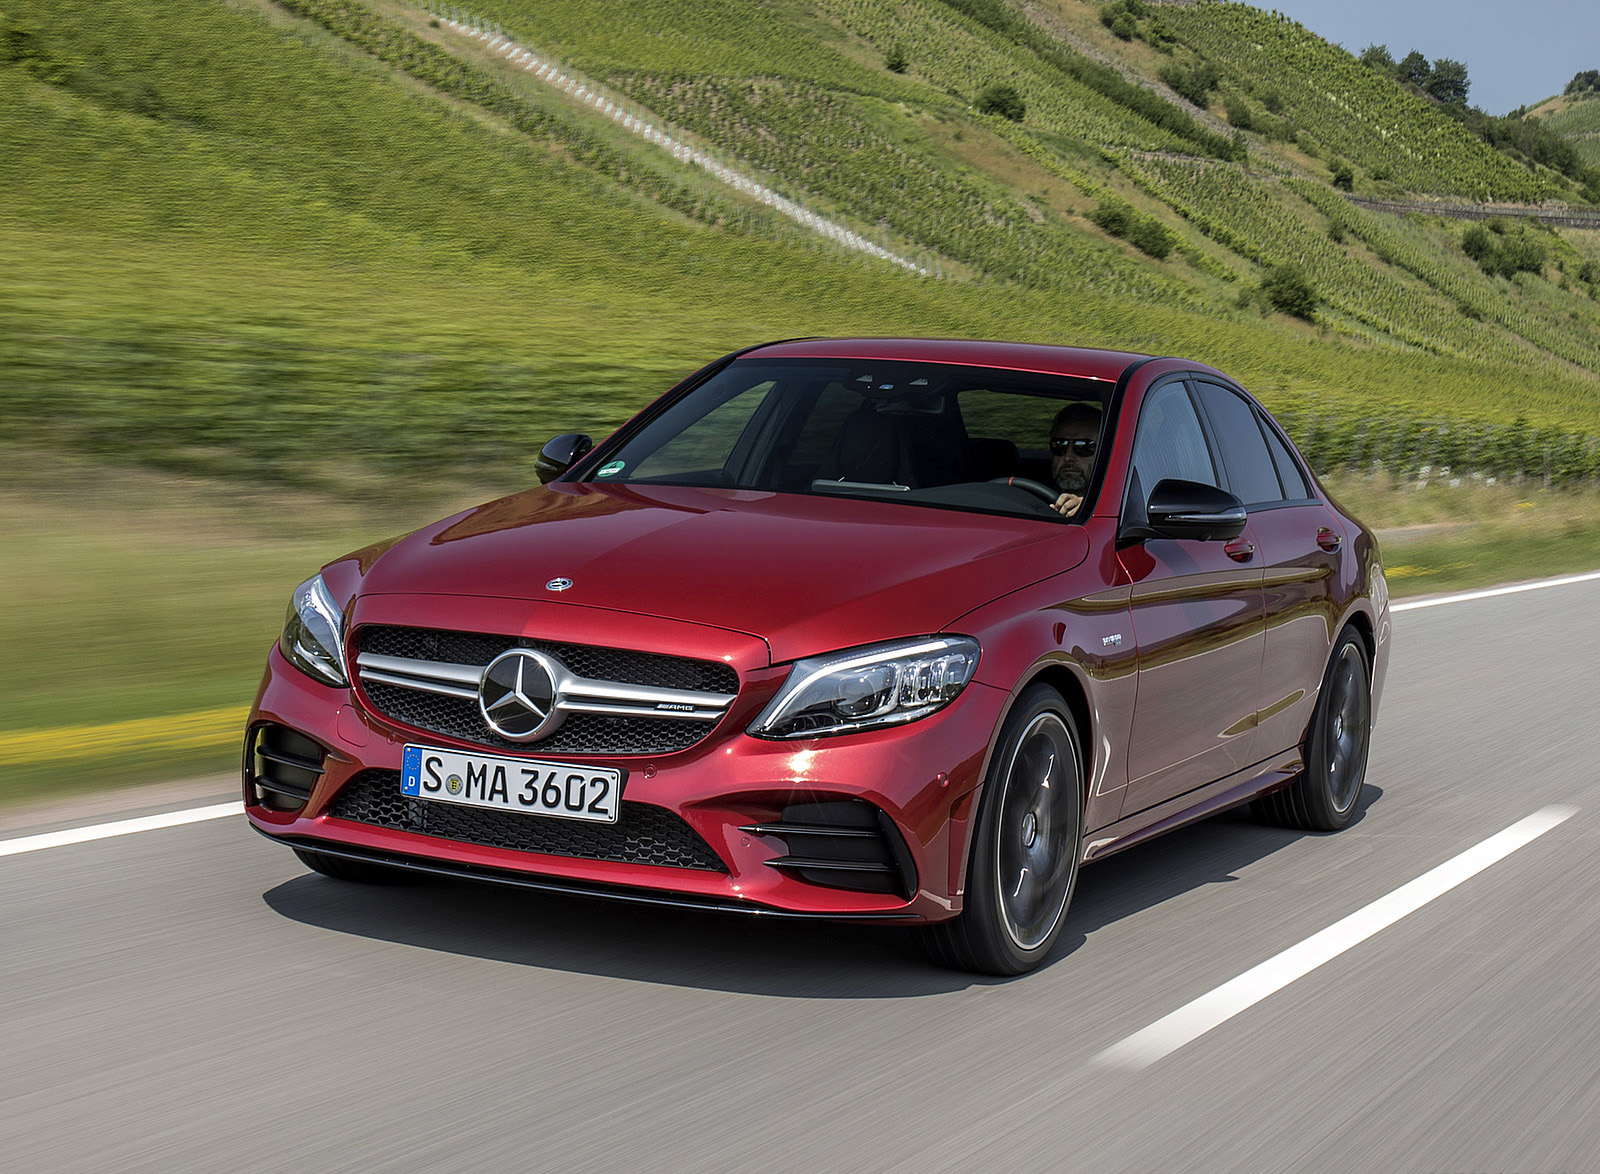 2019 Mercedes-AMG C43 4MATIC Sedan (Color: Hyacinth Red) Front Three-Quarter Wallpapers (1)